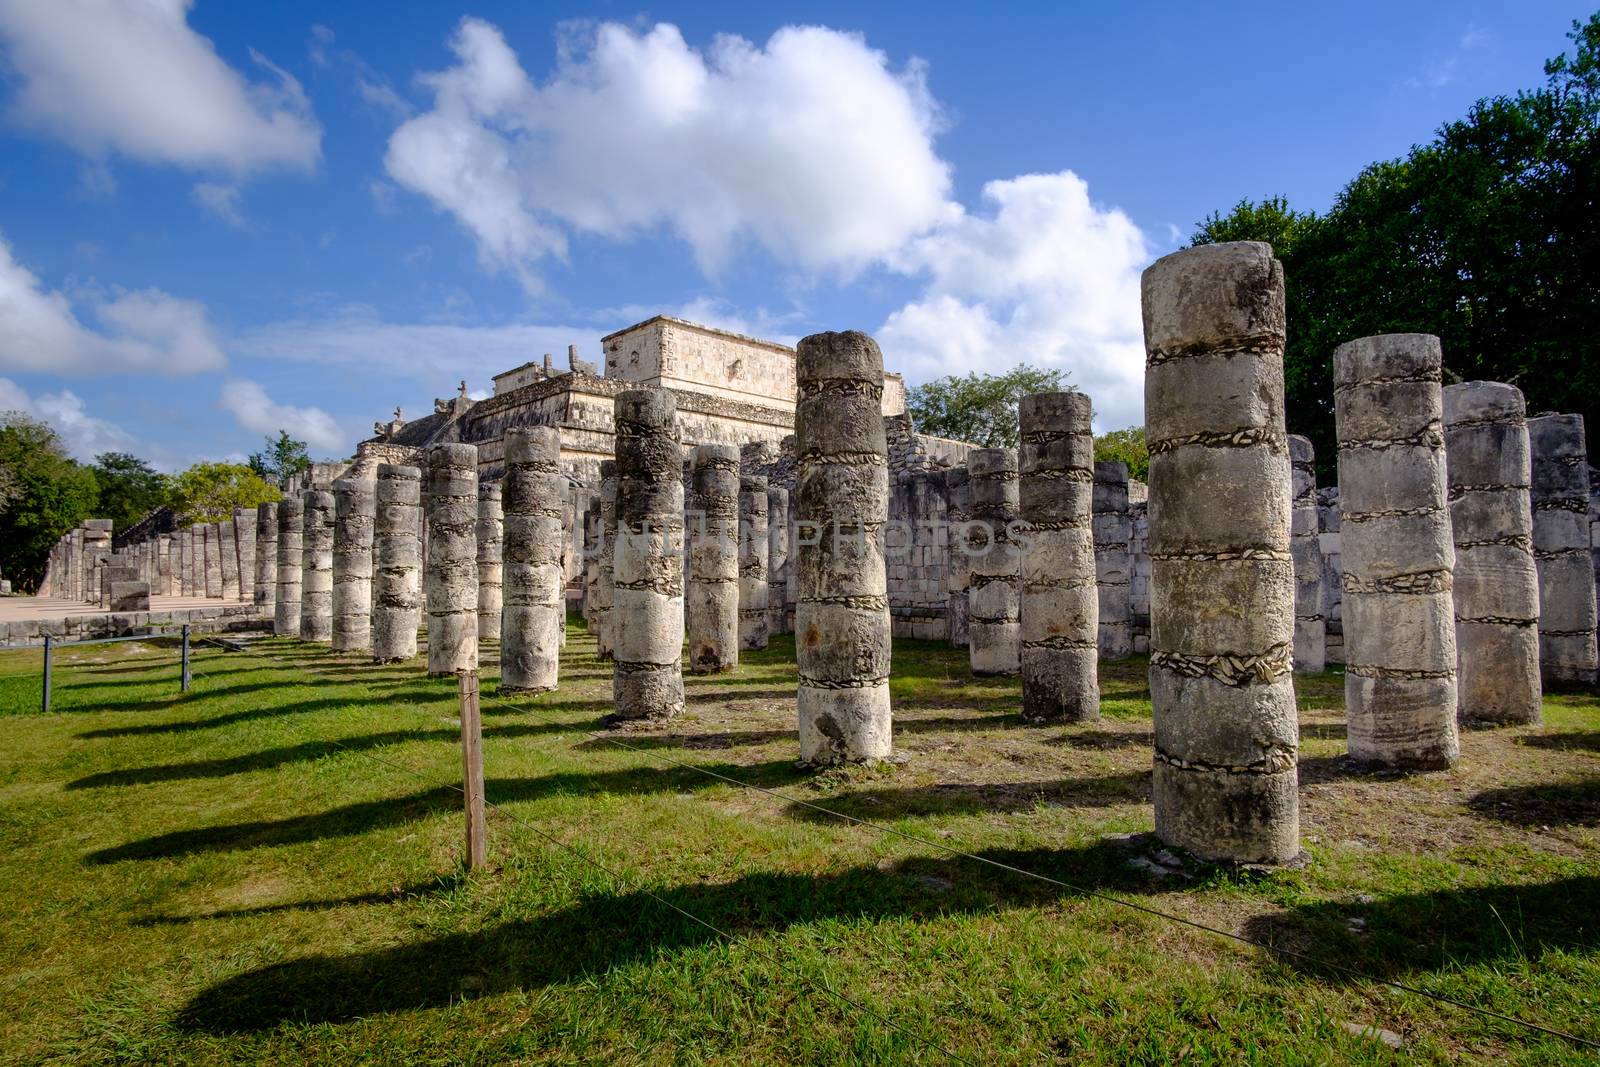 Stone columns and pilars in famous archeological site Chichen Itza, Mexico